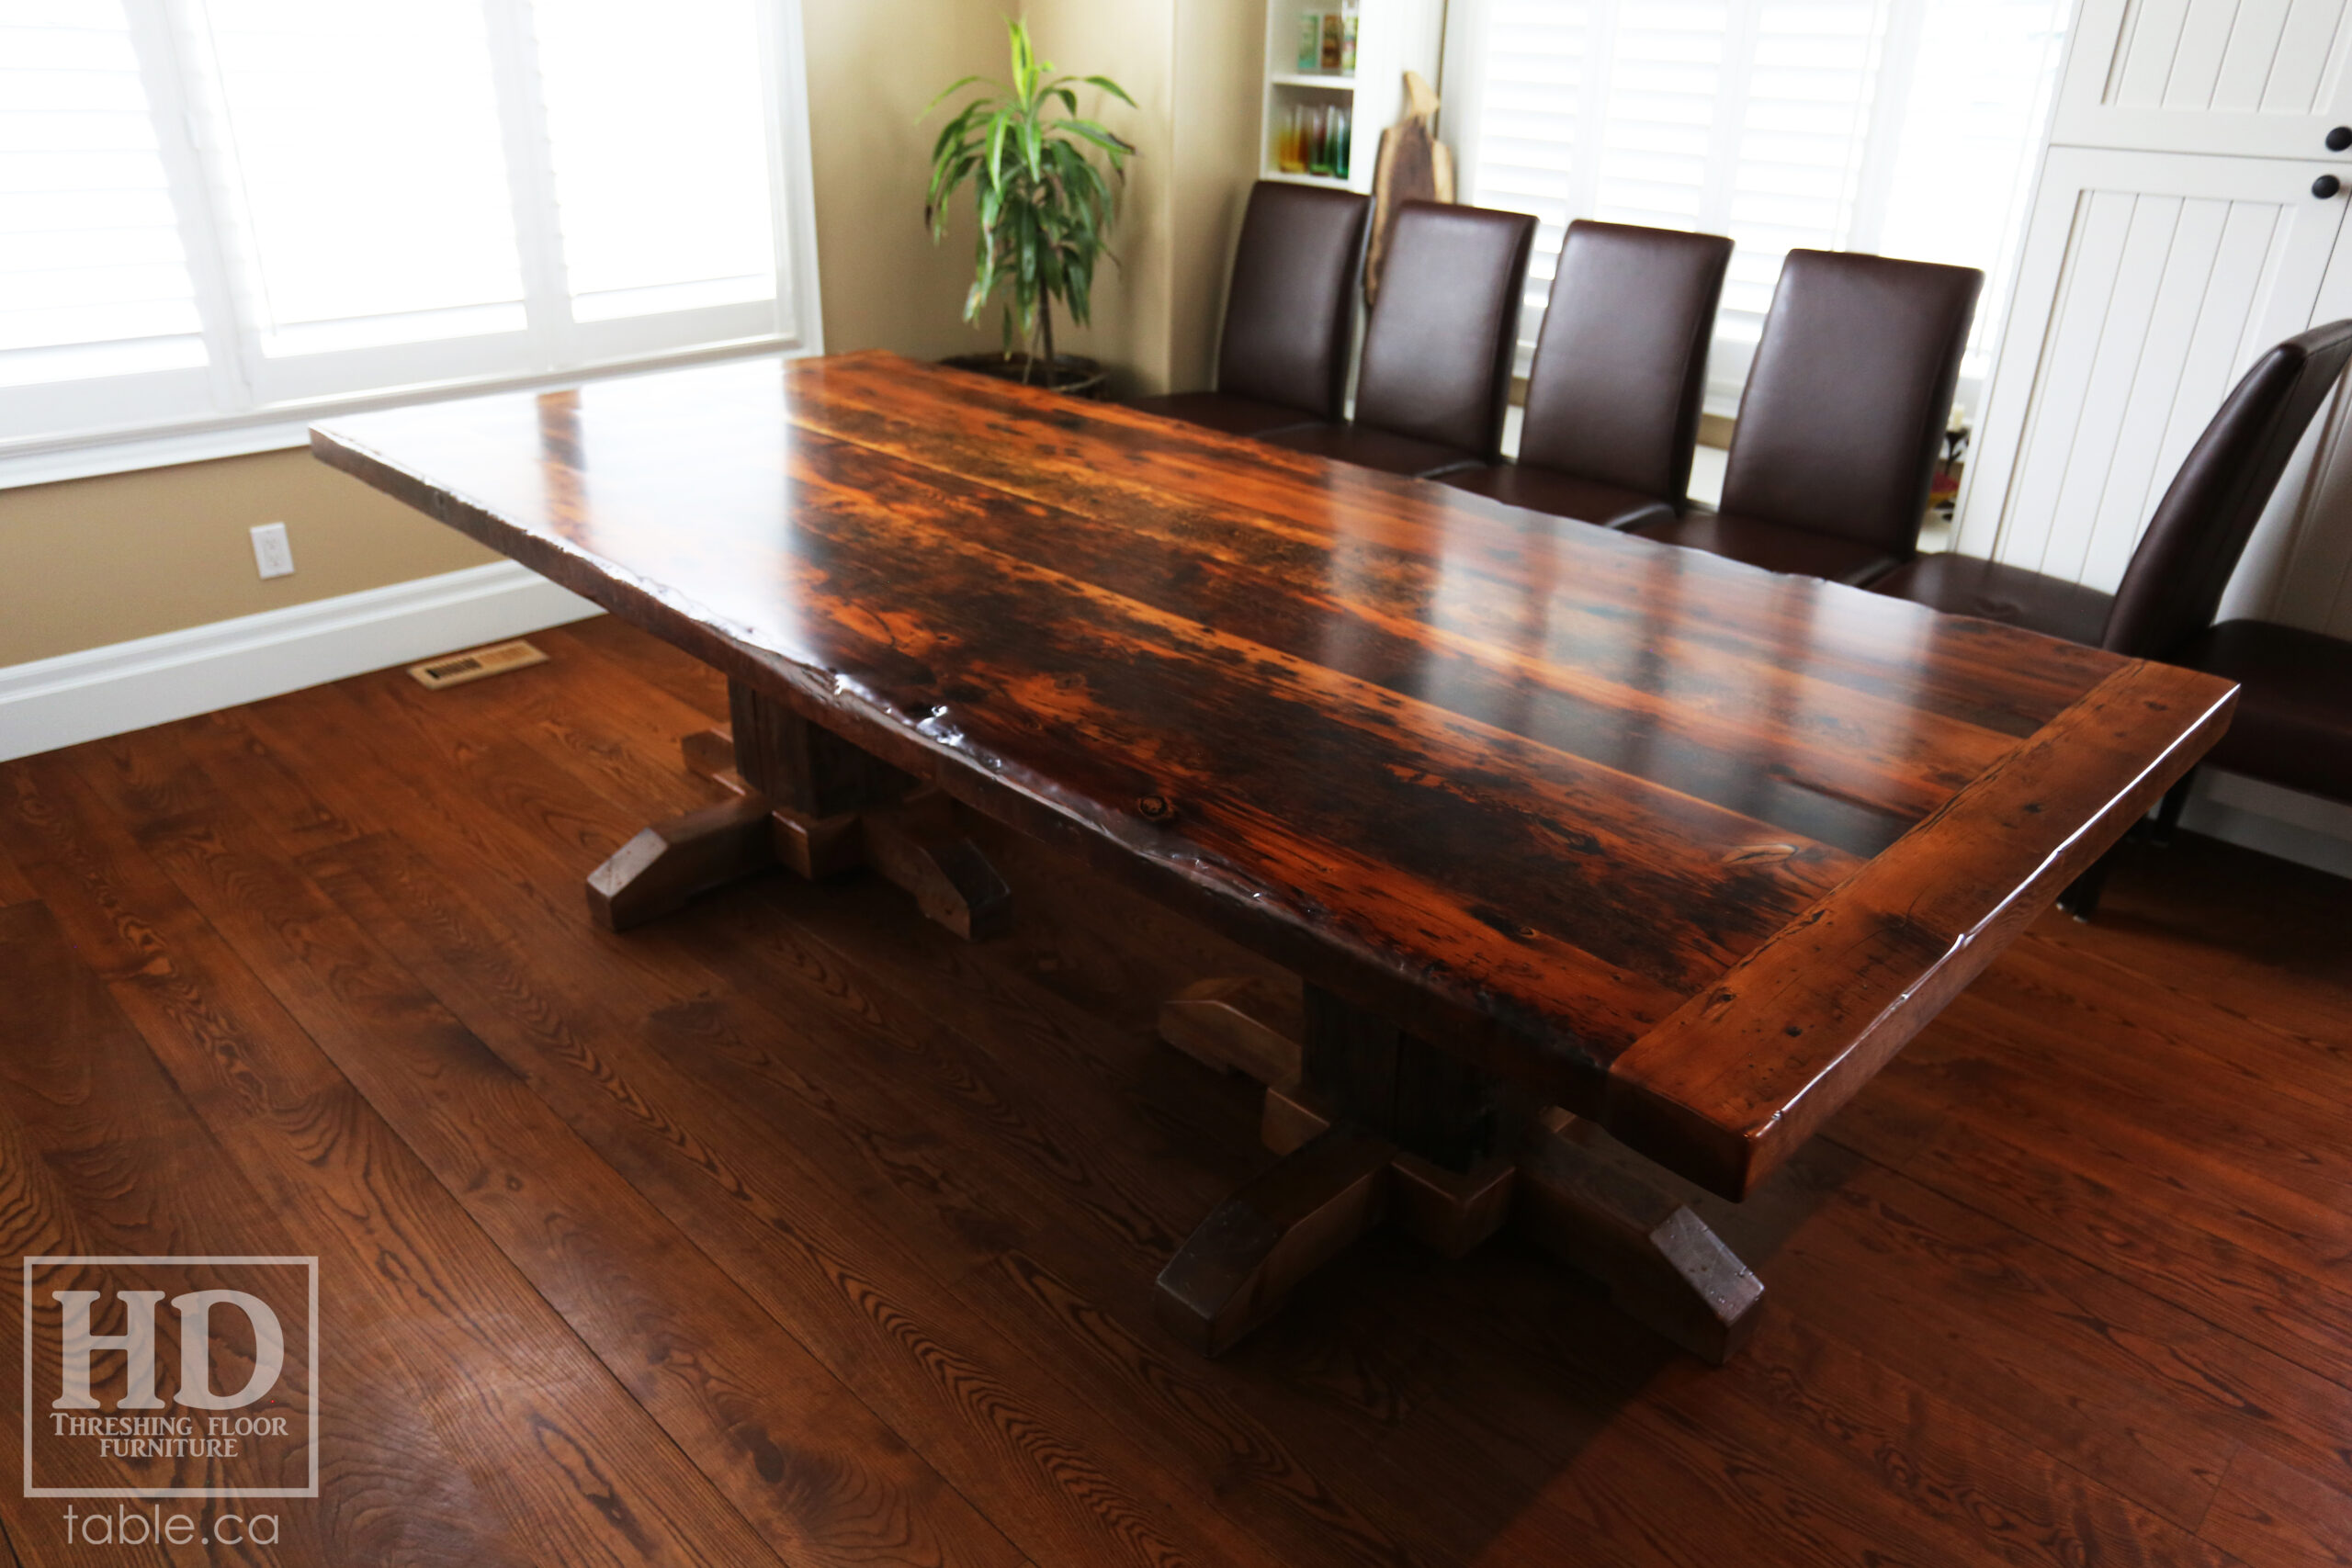 Reclaimed Wood Table with Epoxy Finish by HD Threshing Floor Furniture / www.table.ca